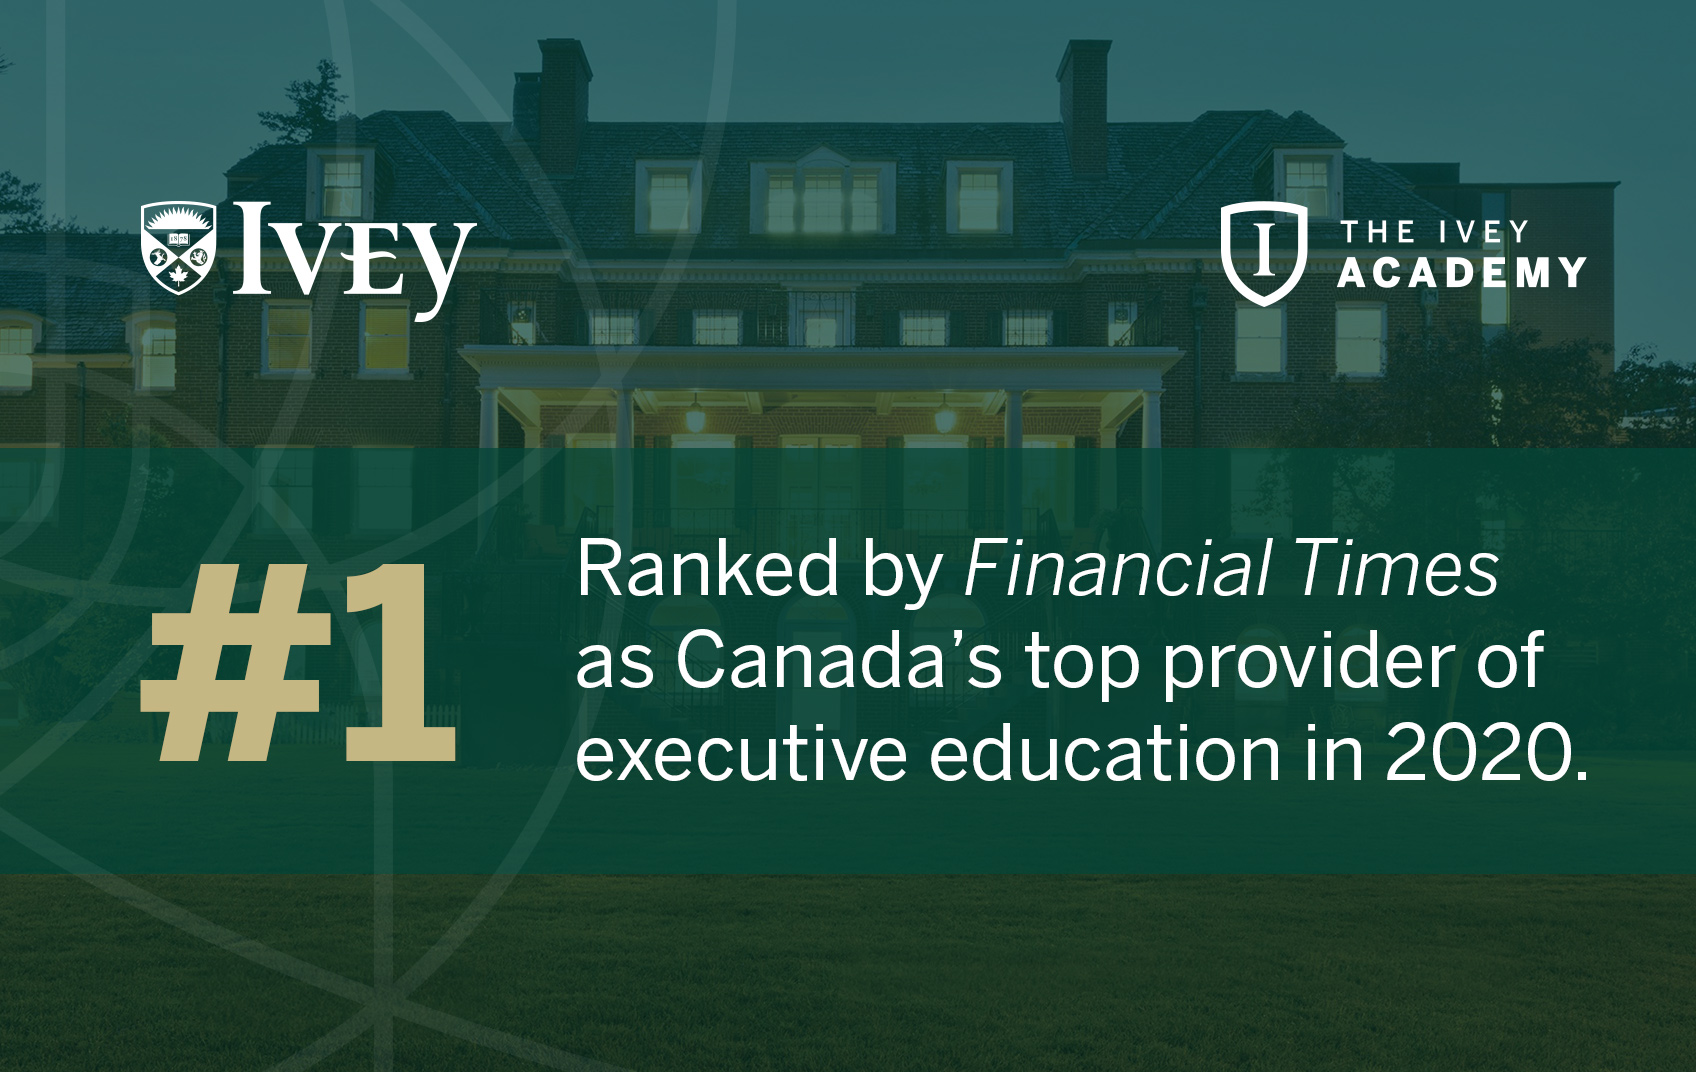 Ivey Academy Ranked #1 in Canada for Executive Education